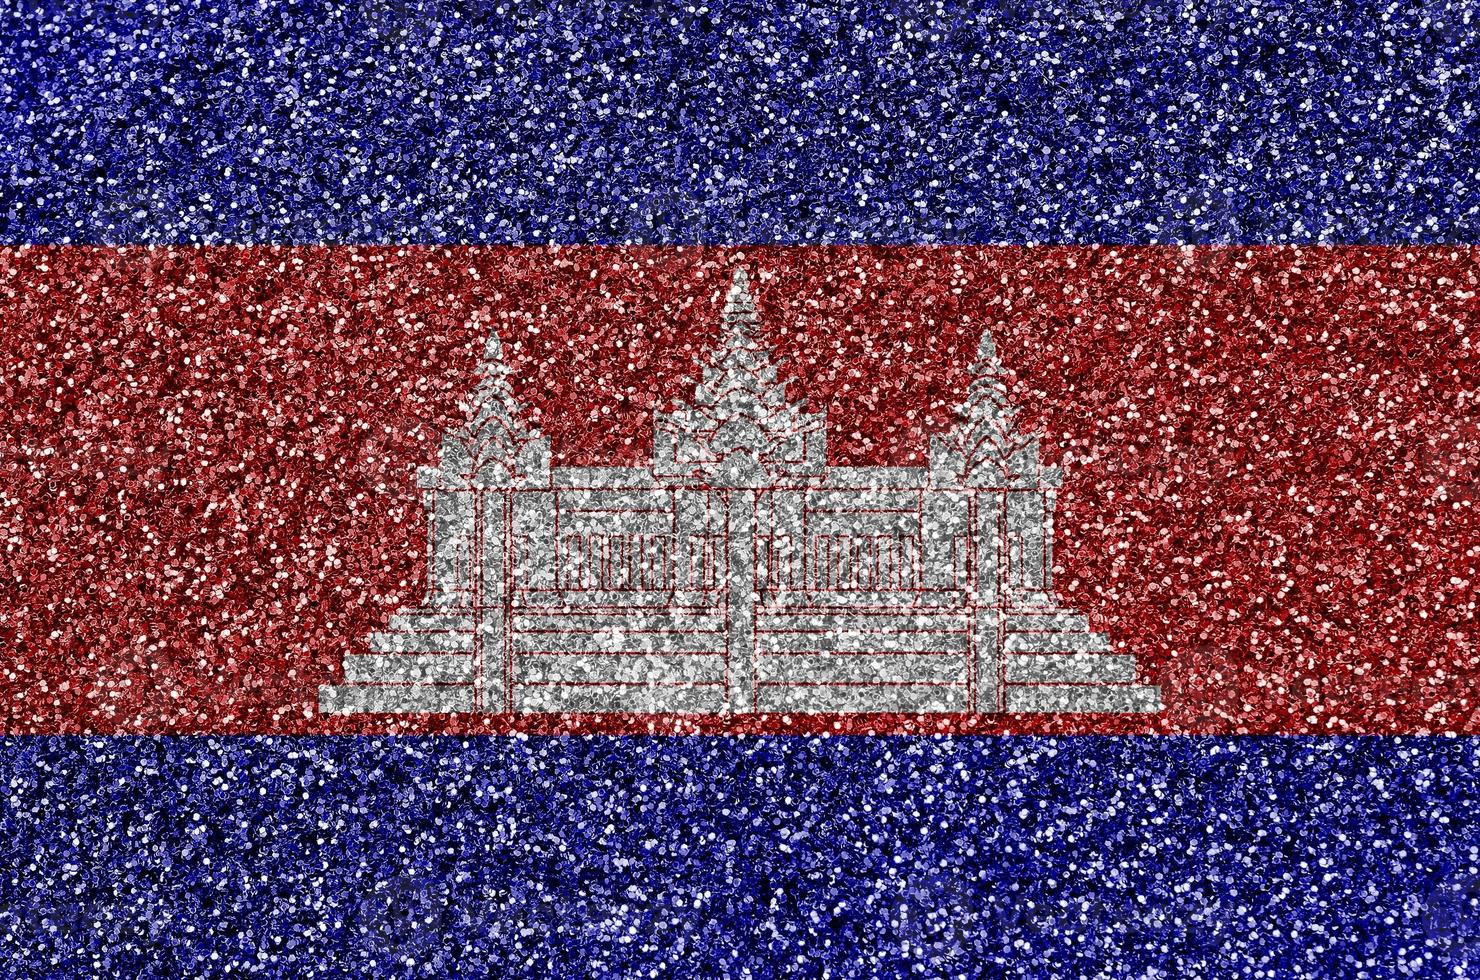 Cambodia flag depicted on many small shiny sequins. Colorful festival background for party photo